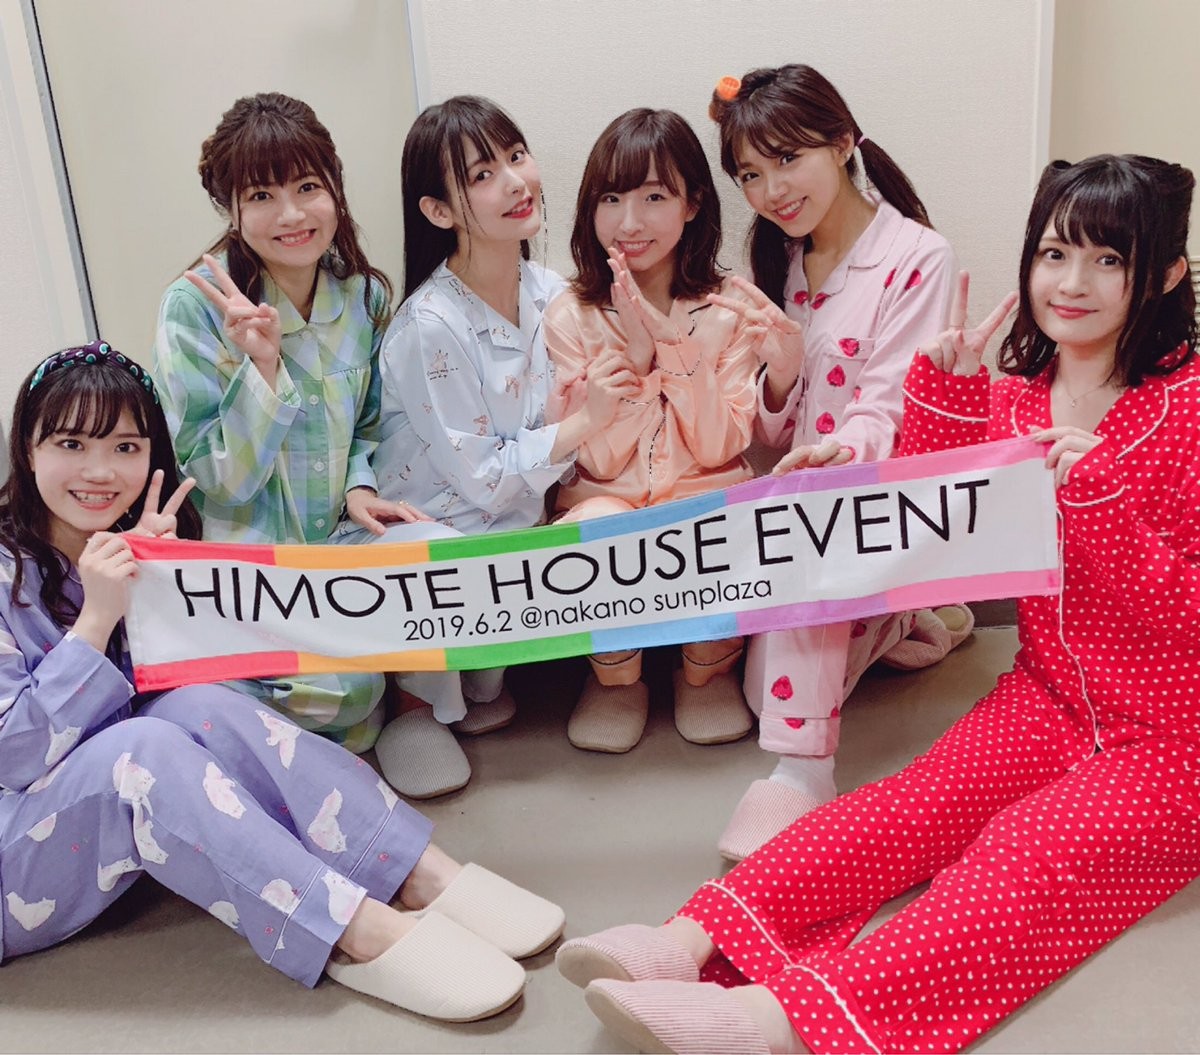 [Image] Beautiful voice actor pajamas party here www